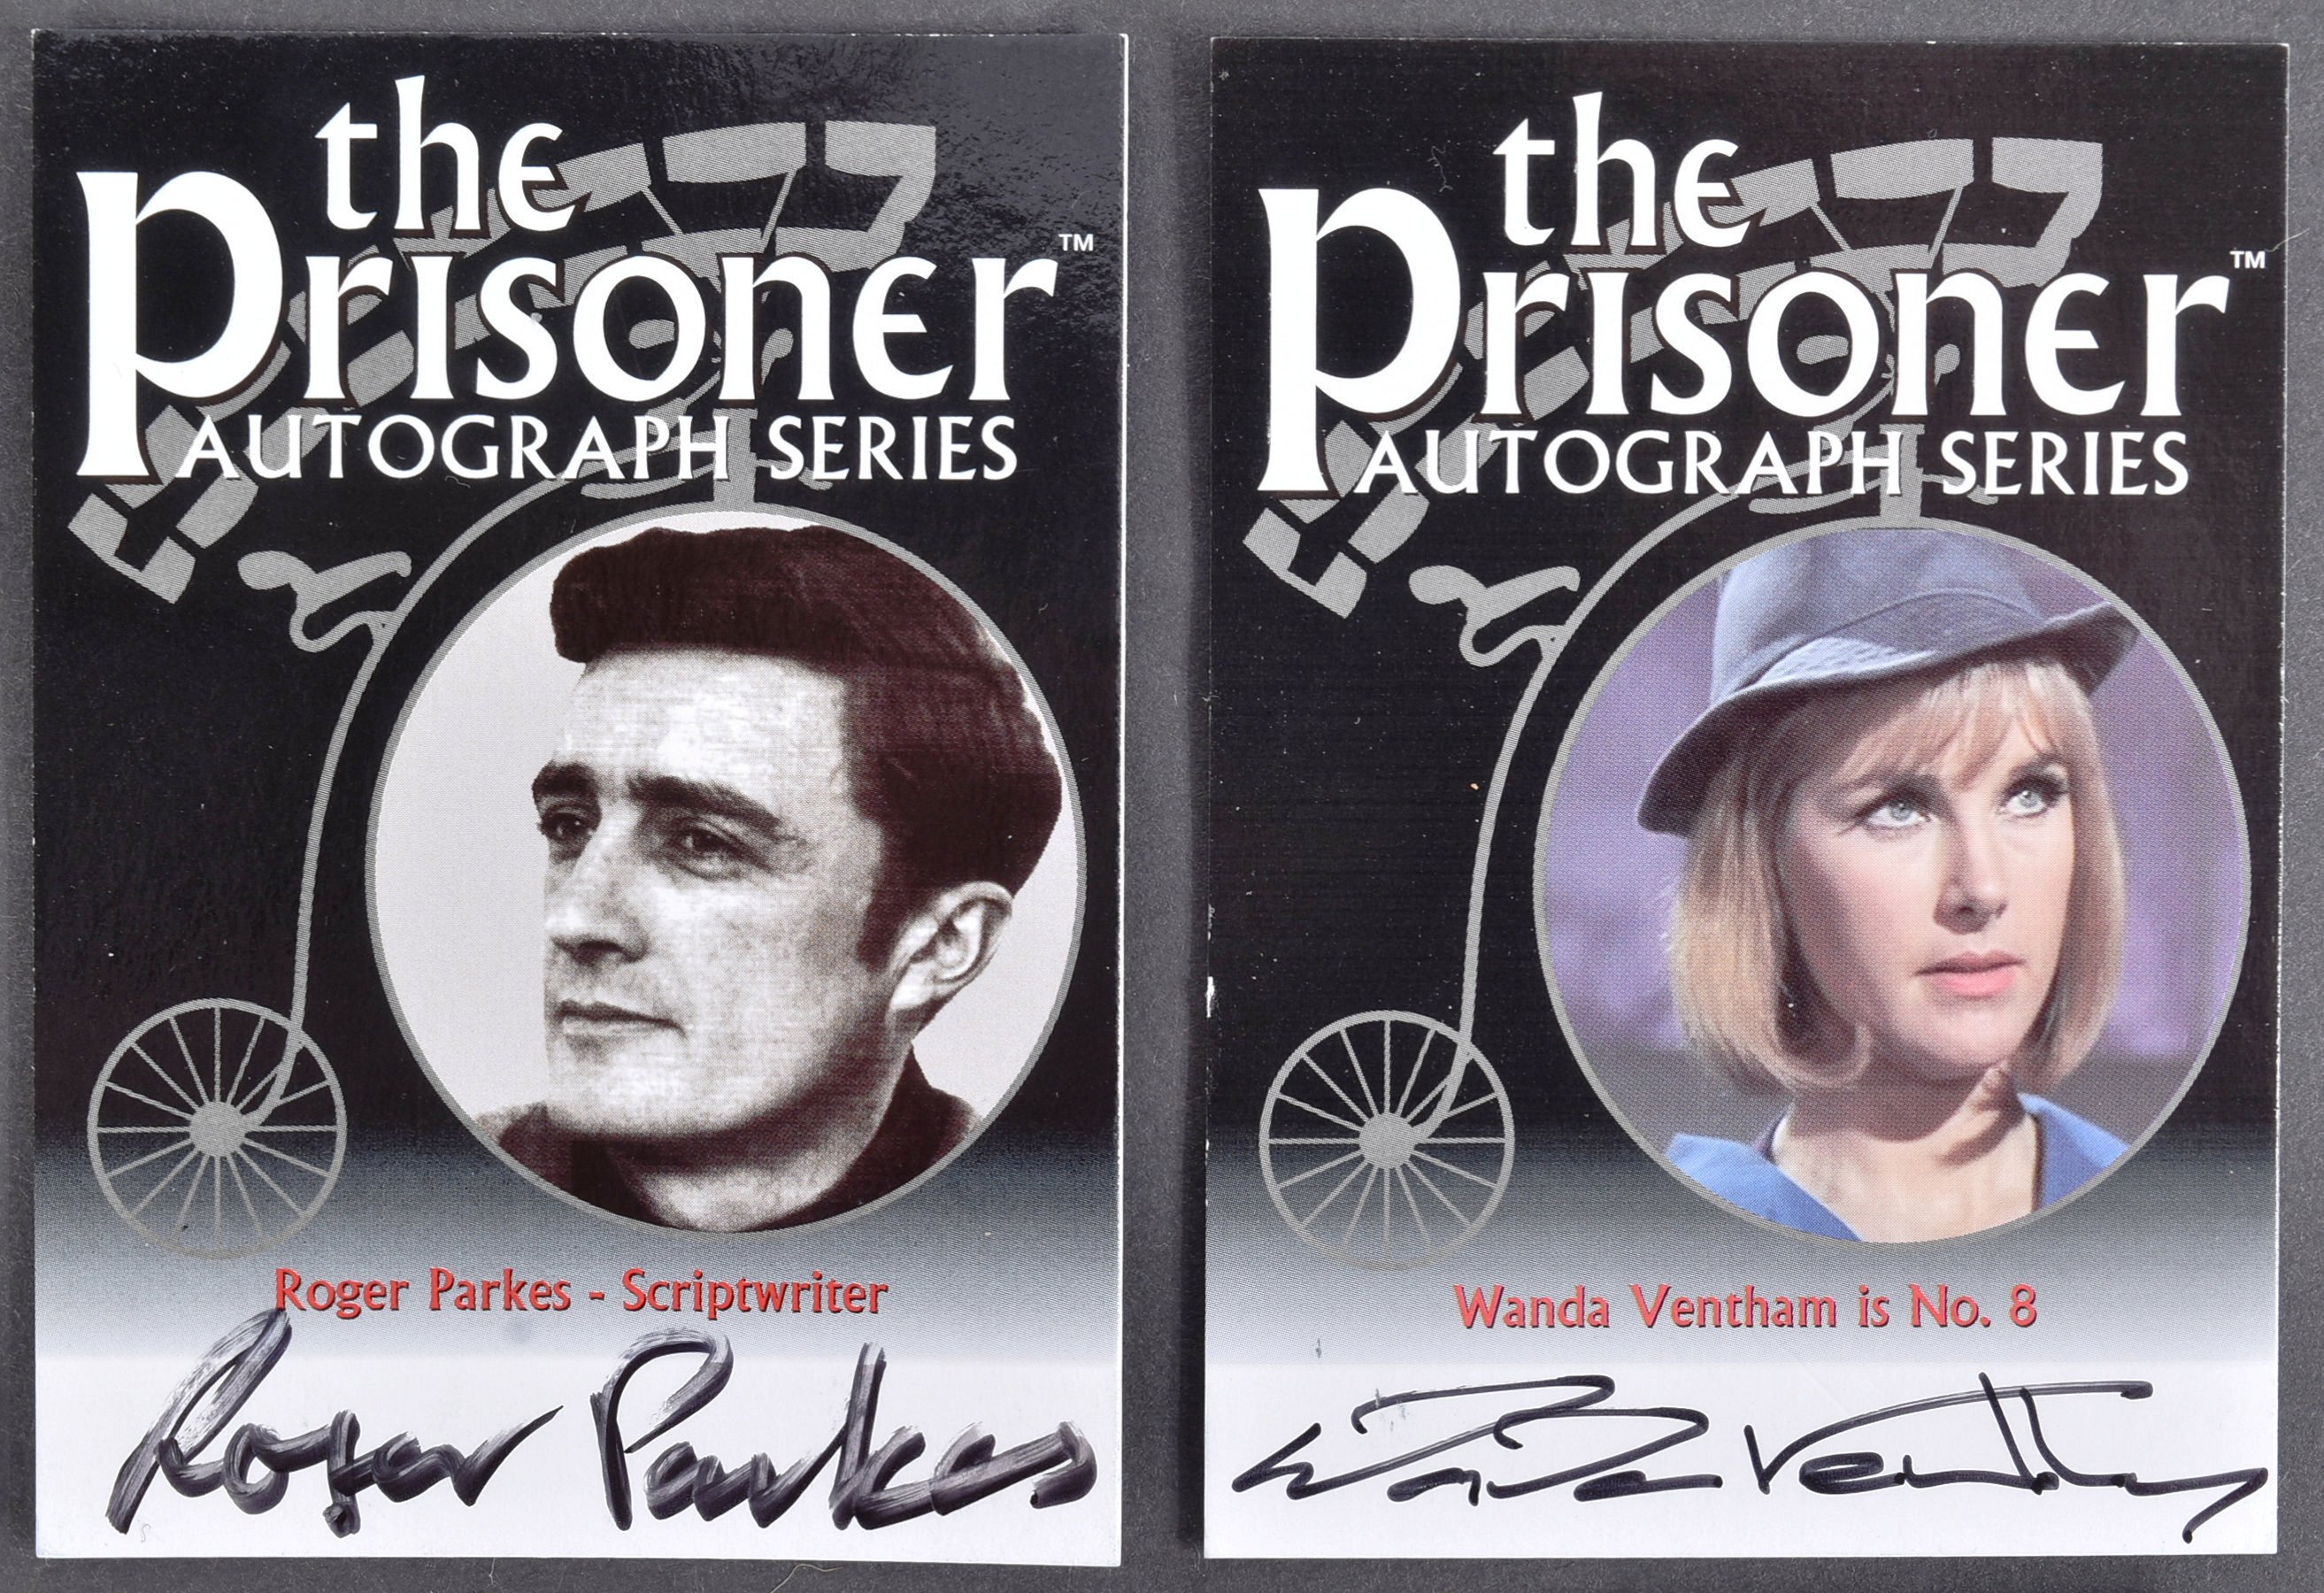 THE PRISONER - CARDS INC - AUTOGRAPH SERIES TRADING CARDS - Image 3 of 5